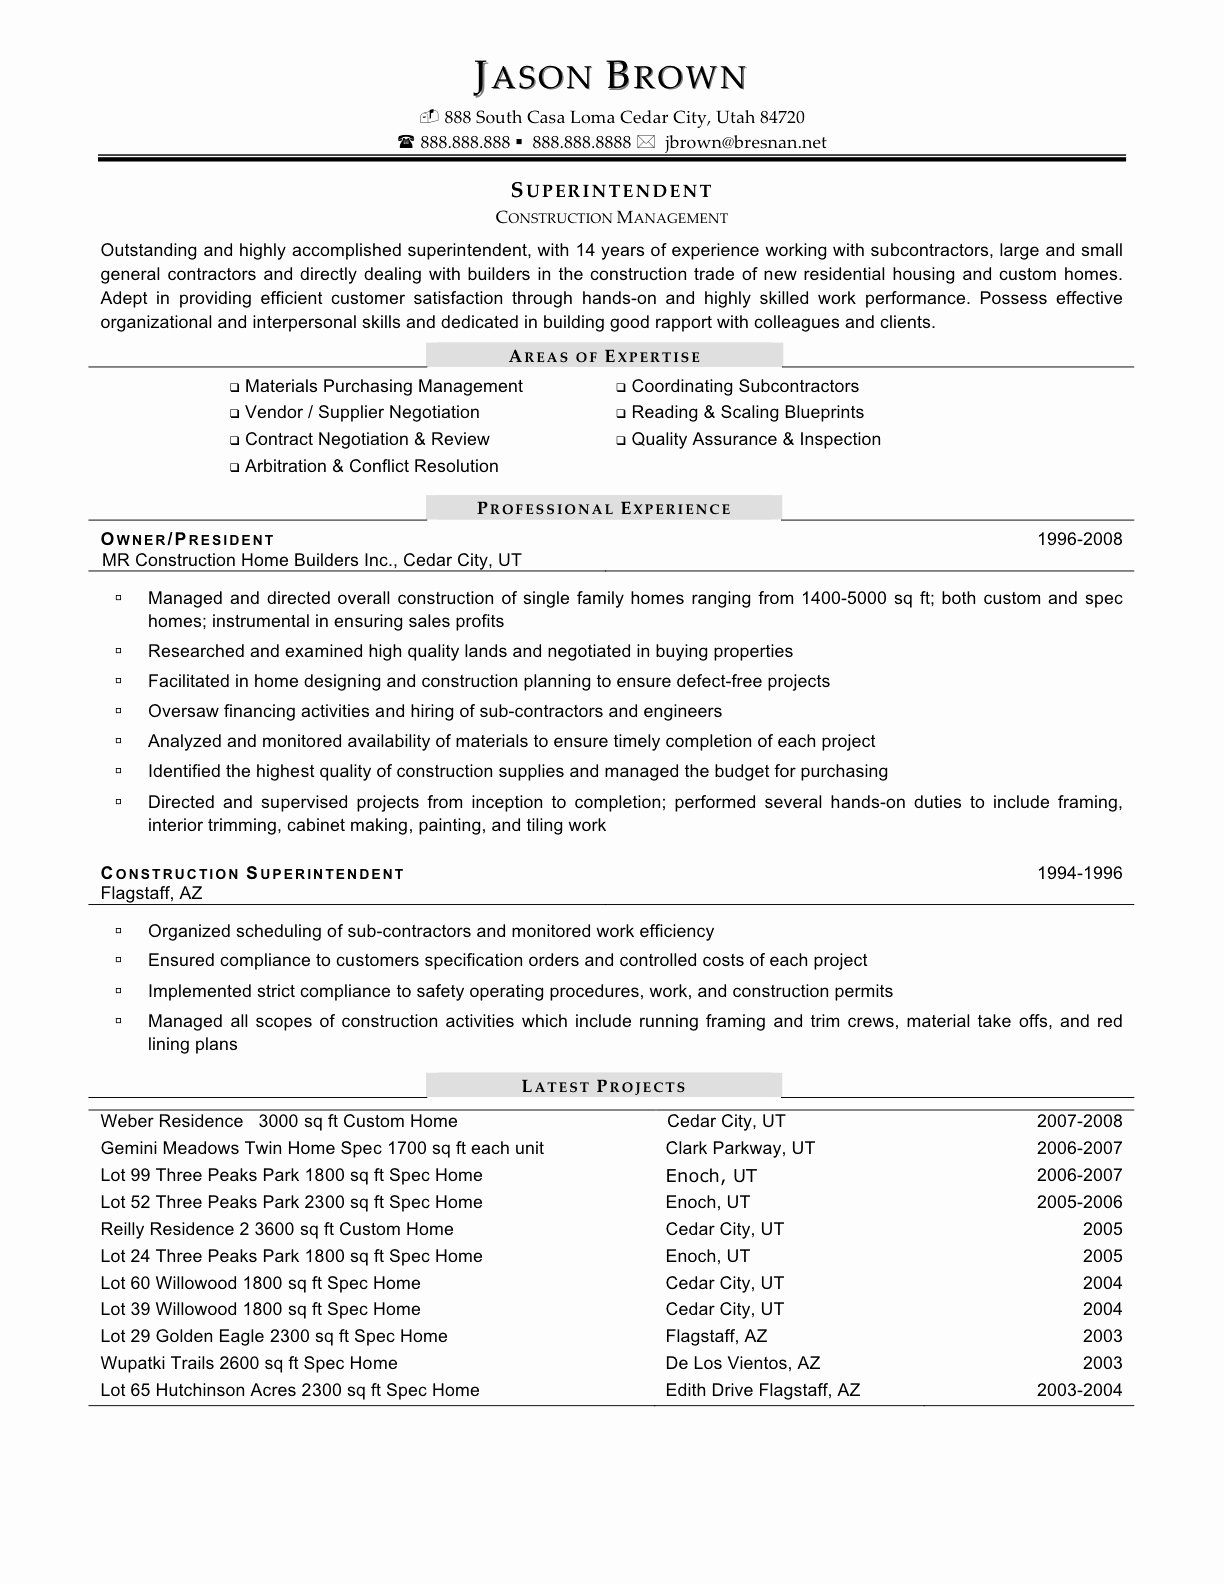 How to Write Example Summary Resume for Construction